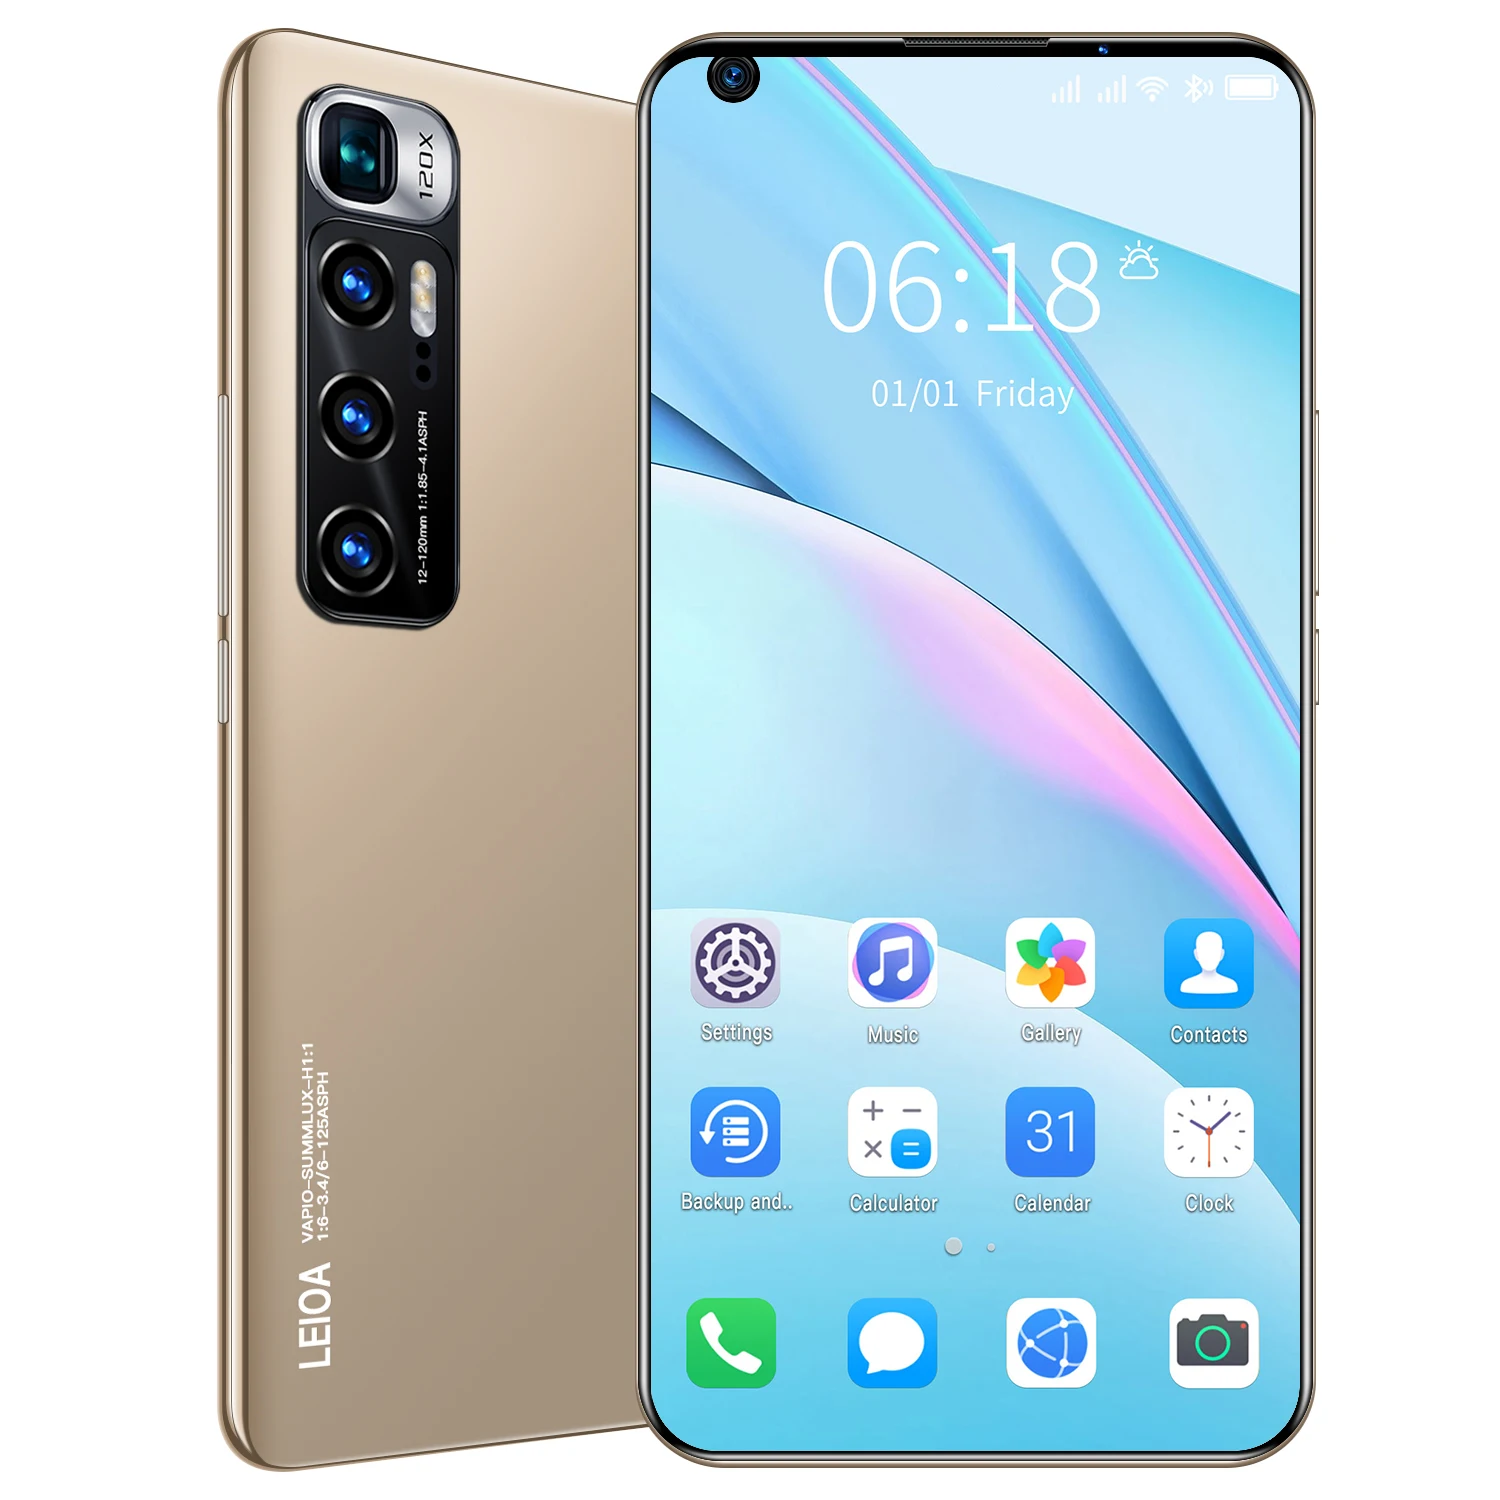 

New Original Unlocked Smartphone M11 Pro With Dual SIM Card Face ID Unlock Android 9.0 4GB+64GB Mobile Phone